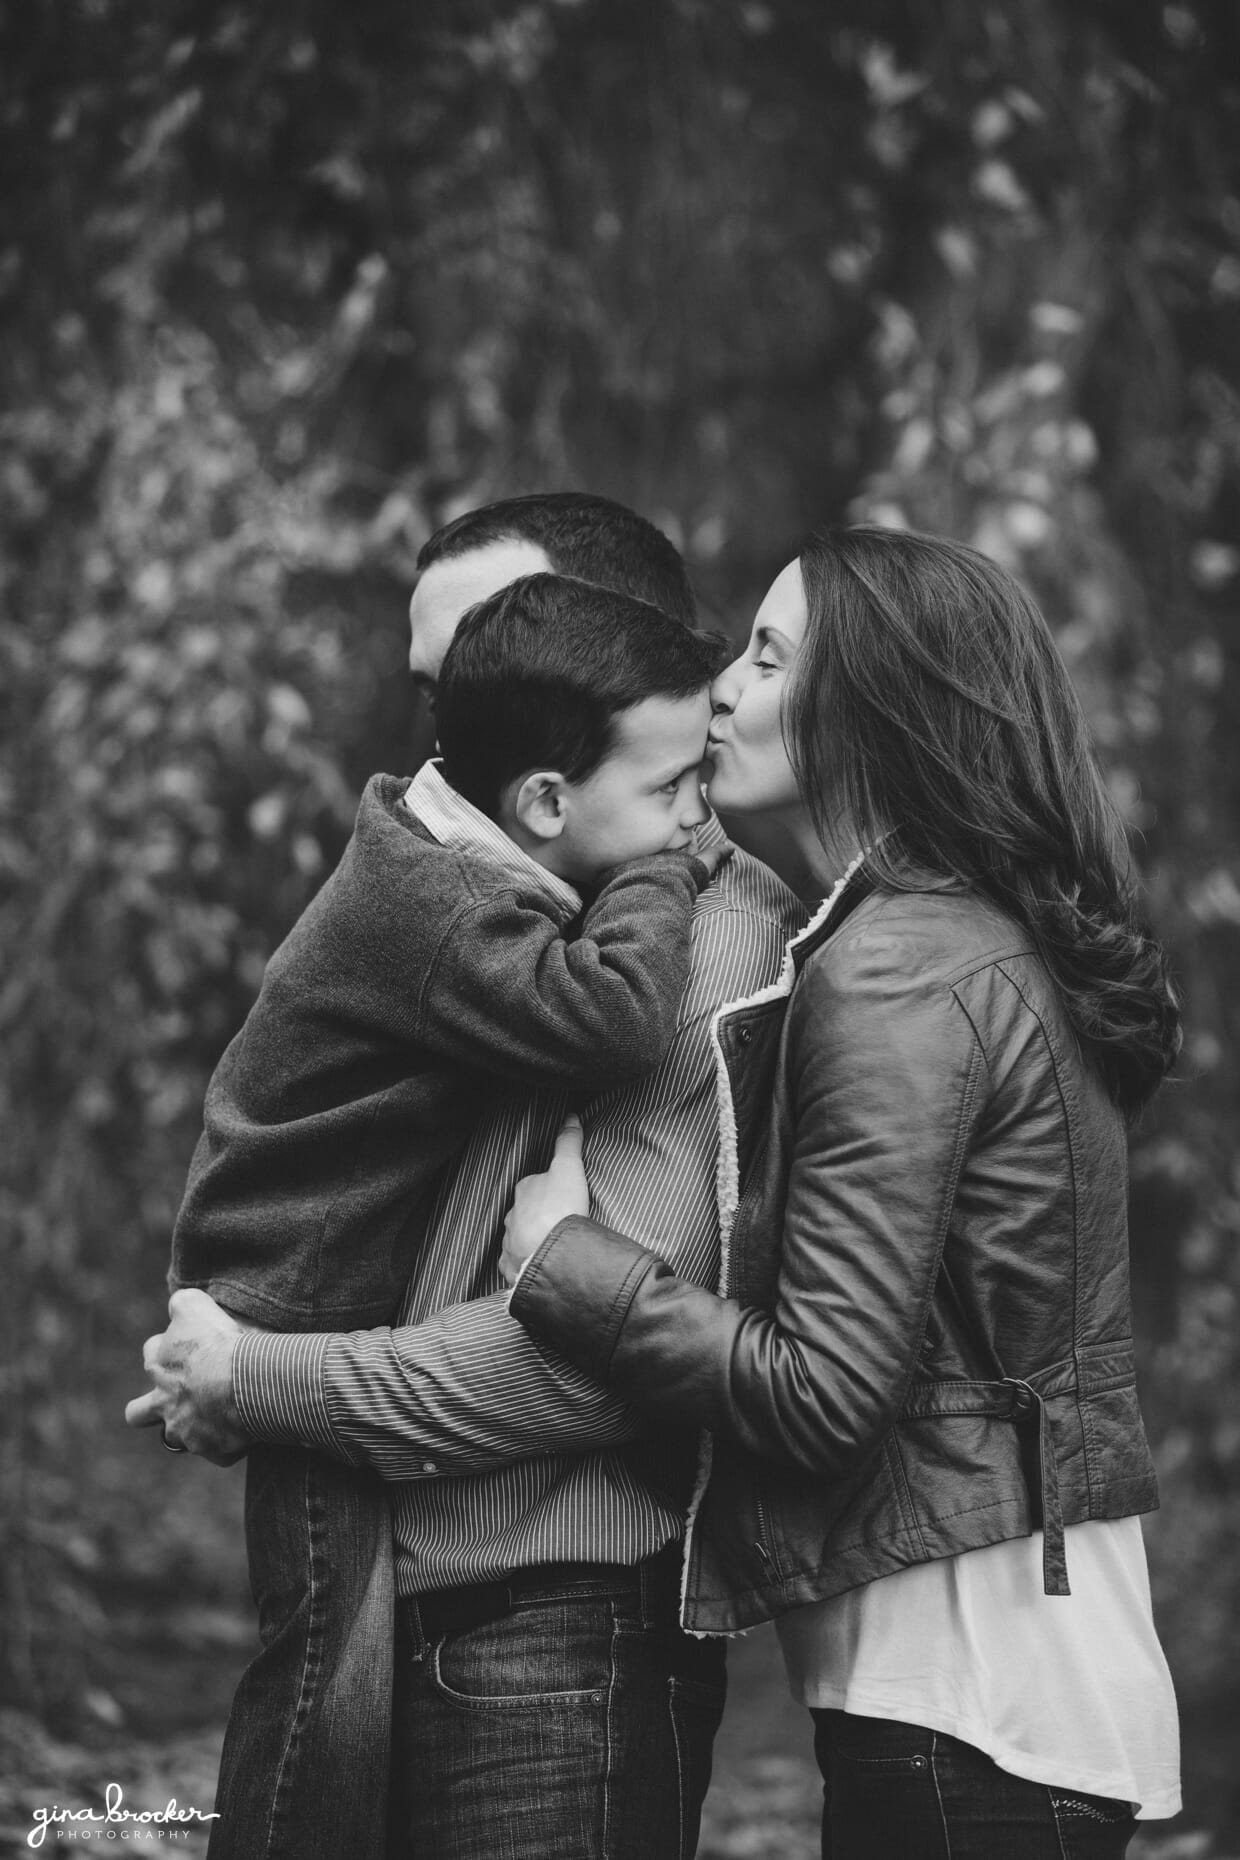 A mother kisses her sons forehead during their natural photo session in Boston's Arnold Arboretum